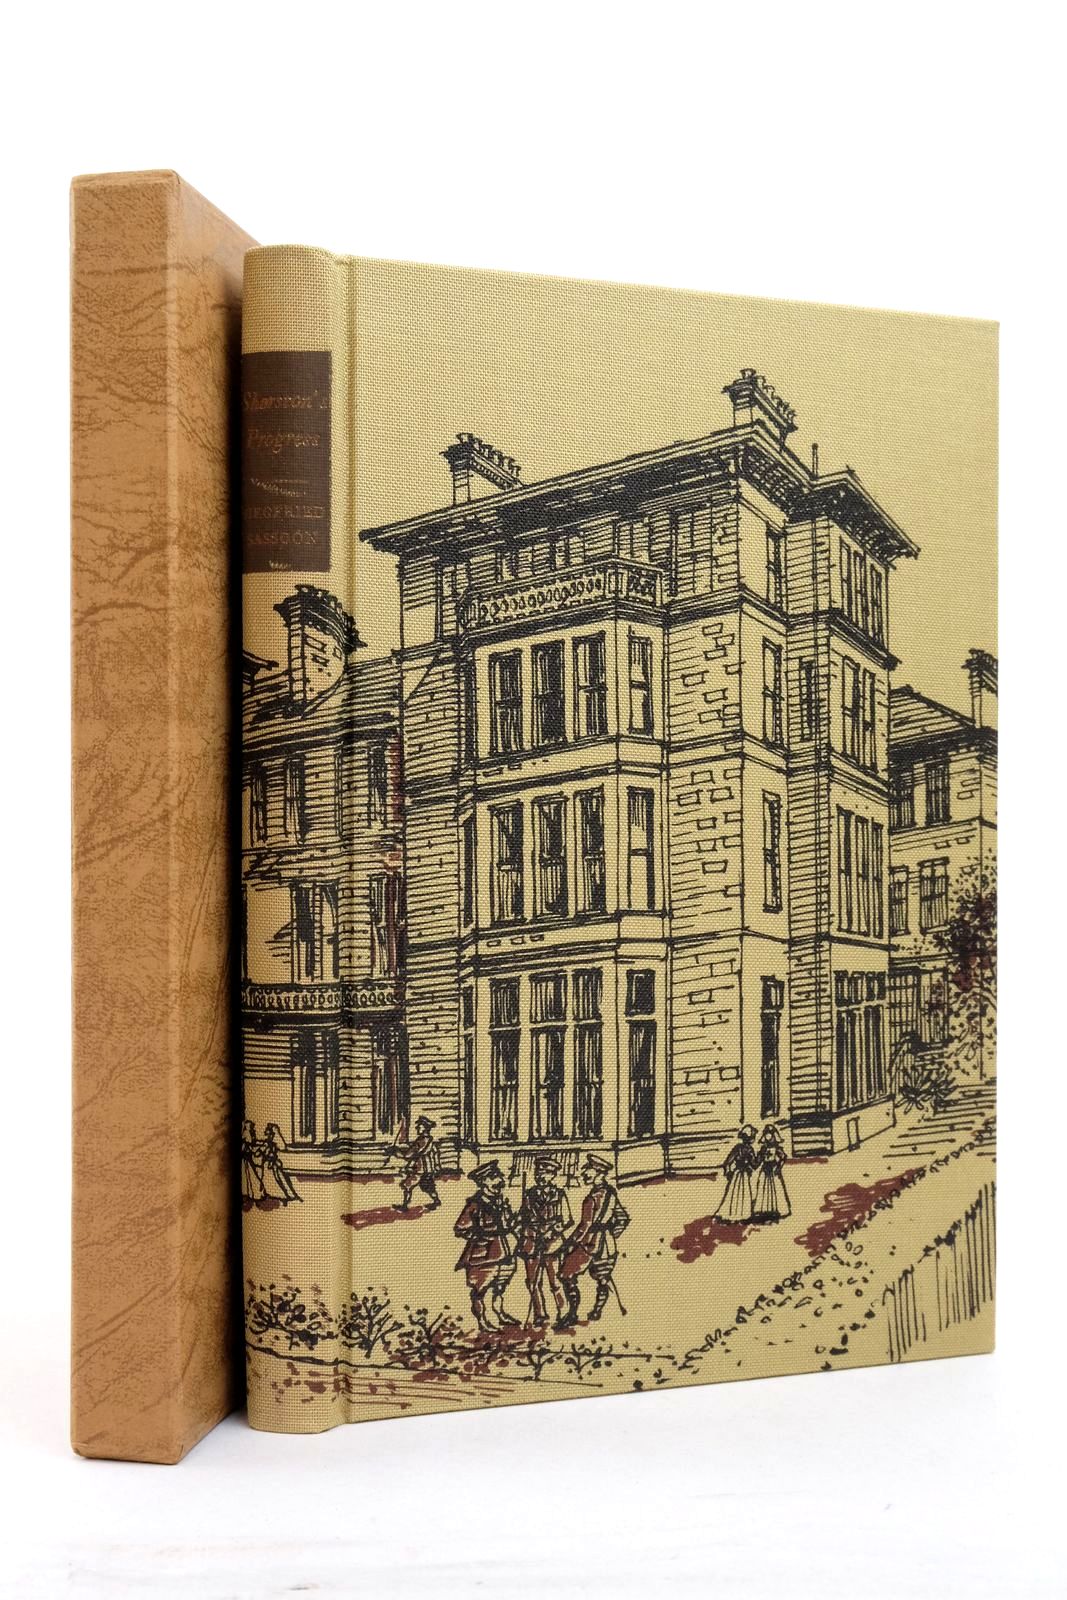 Photo of SHERSTON'S PROGRESS written by Sassoon, Siegfried illustrated by Lawrence, John published by Folio Society (STOCK CODE: 2138226)  for sale by Stella & Rose's Books